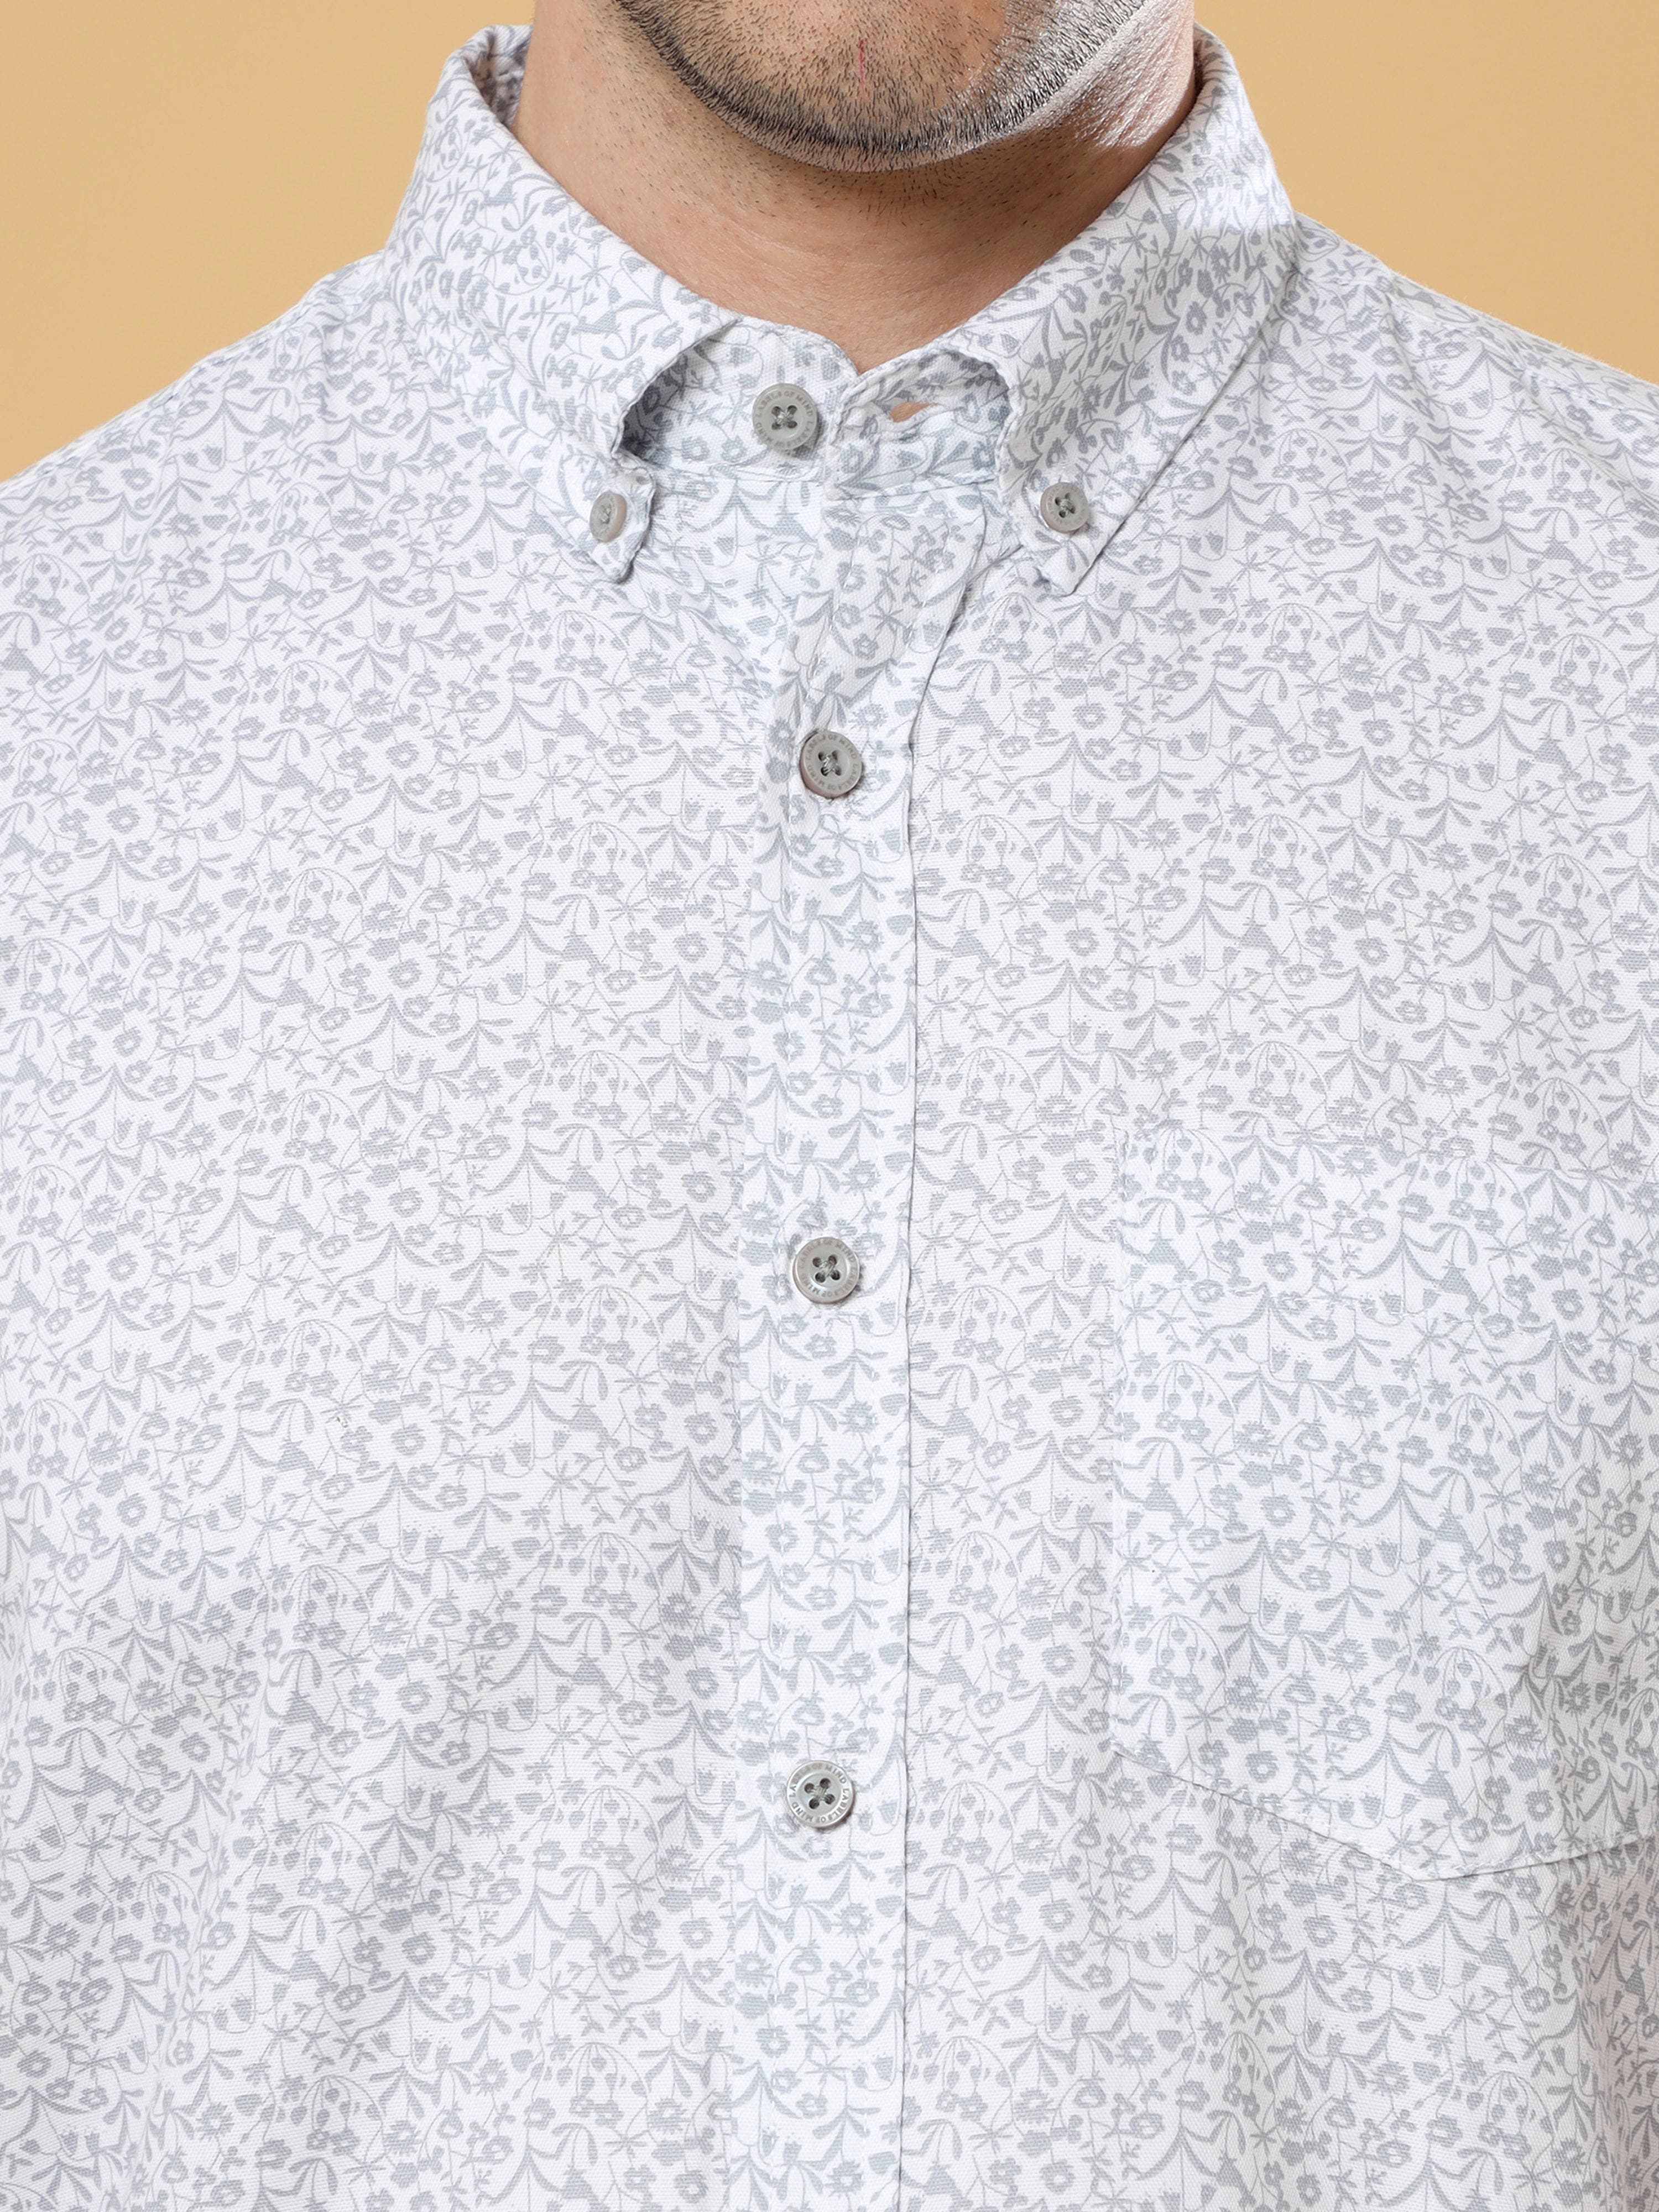 Buy Latest Printed Shirts White for Men Online in IndiaRs. 1019.00